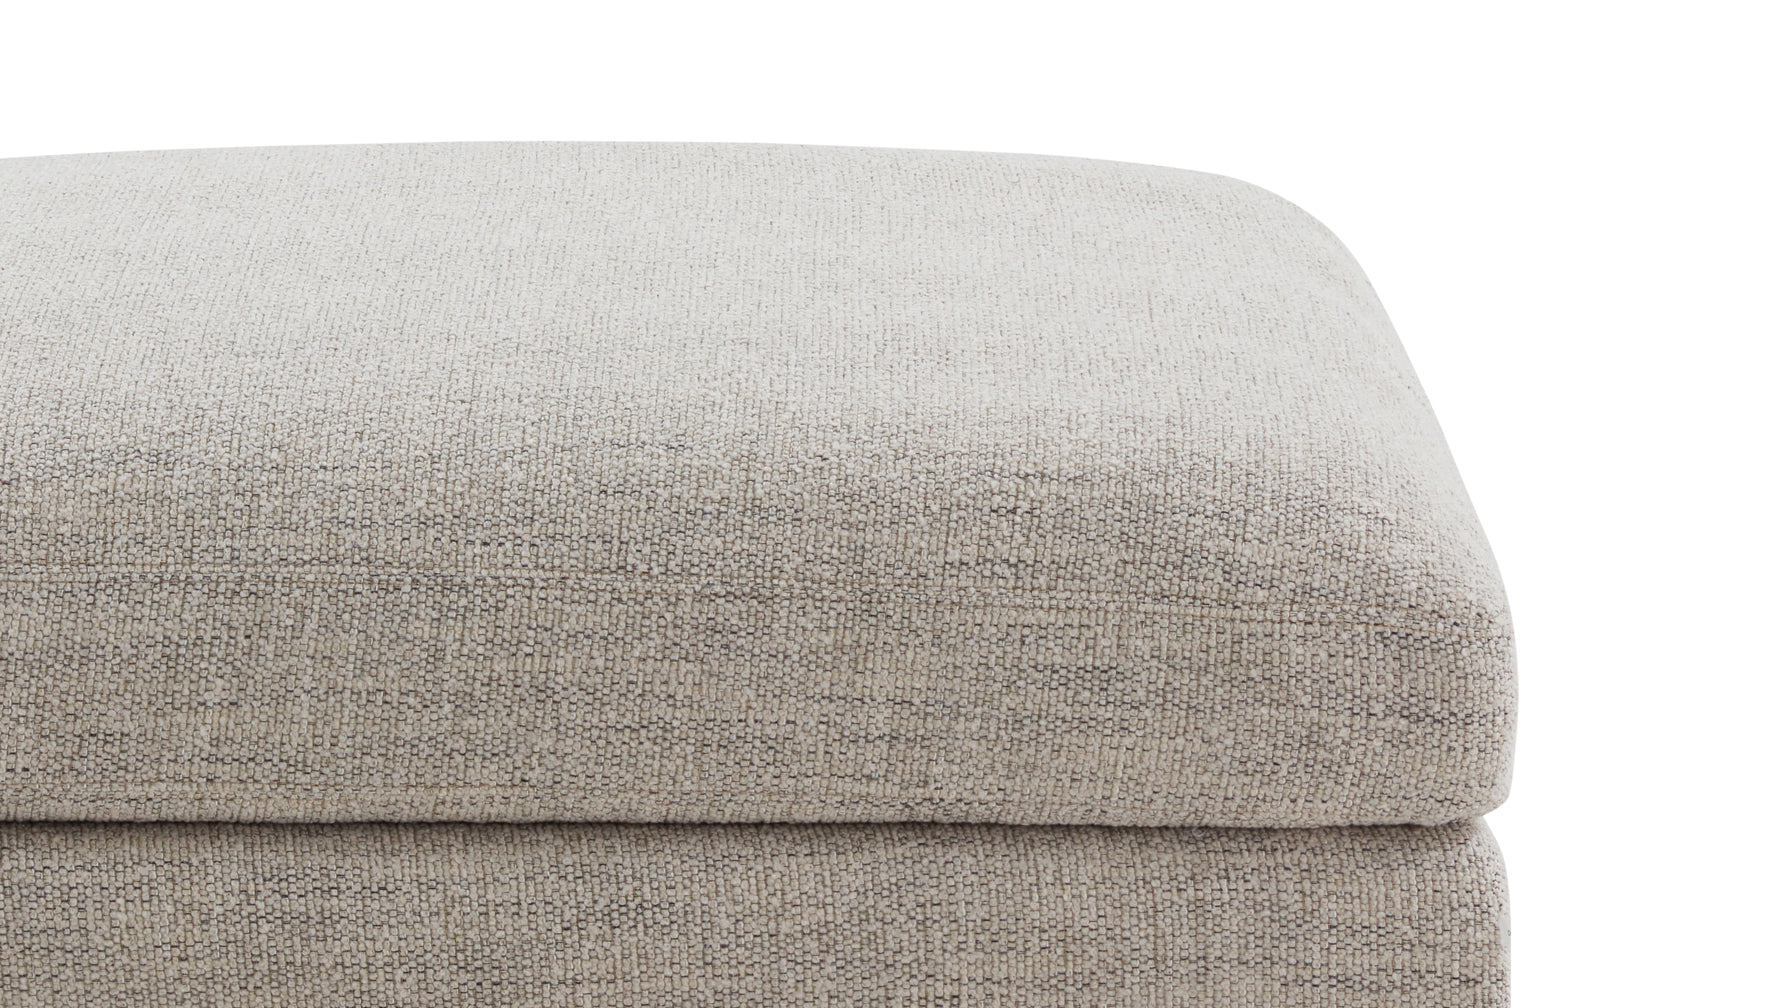 Get Together™ Ottoman, Large, Oatmeal - Image 7